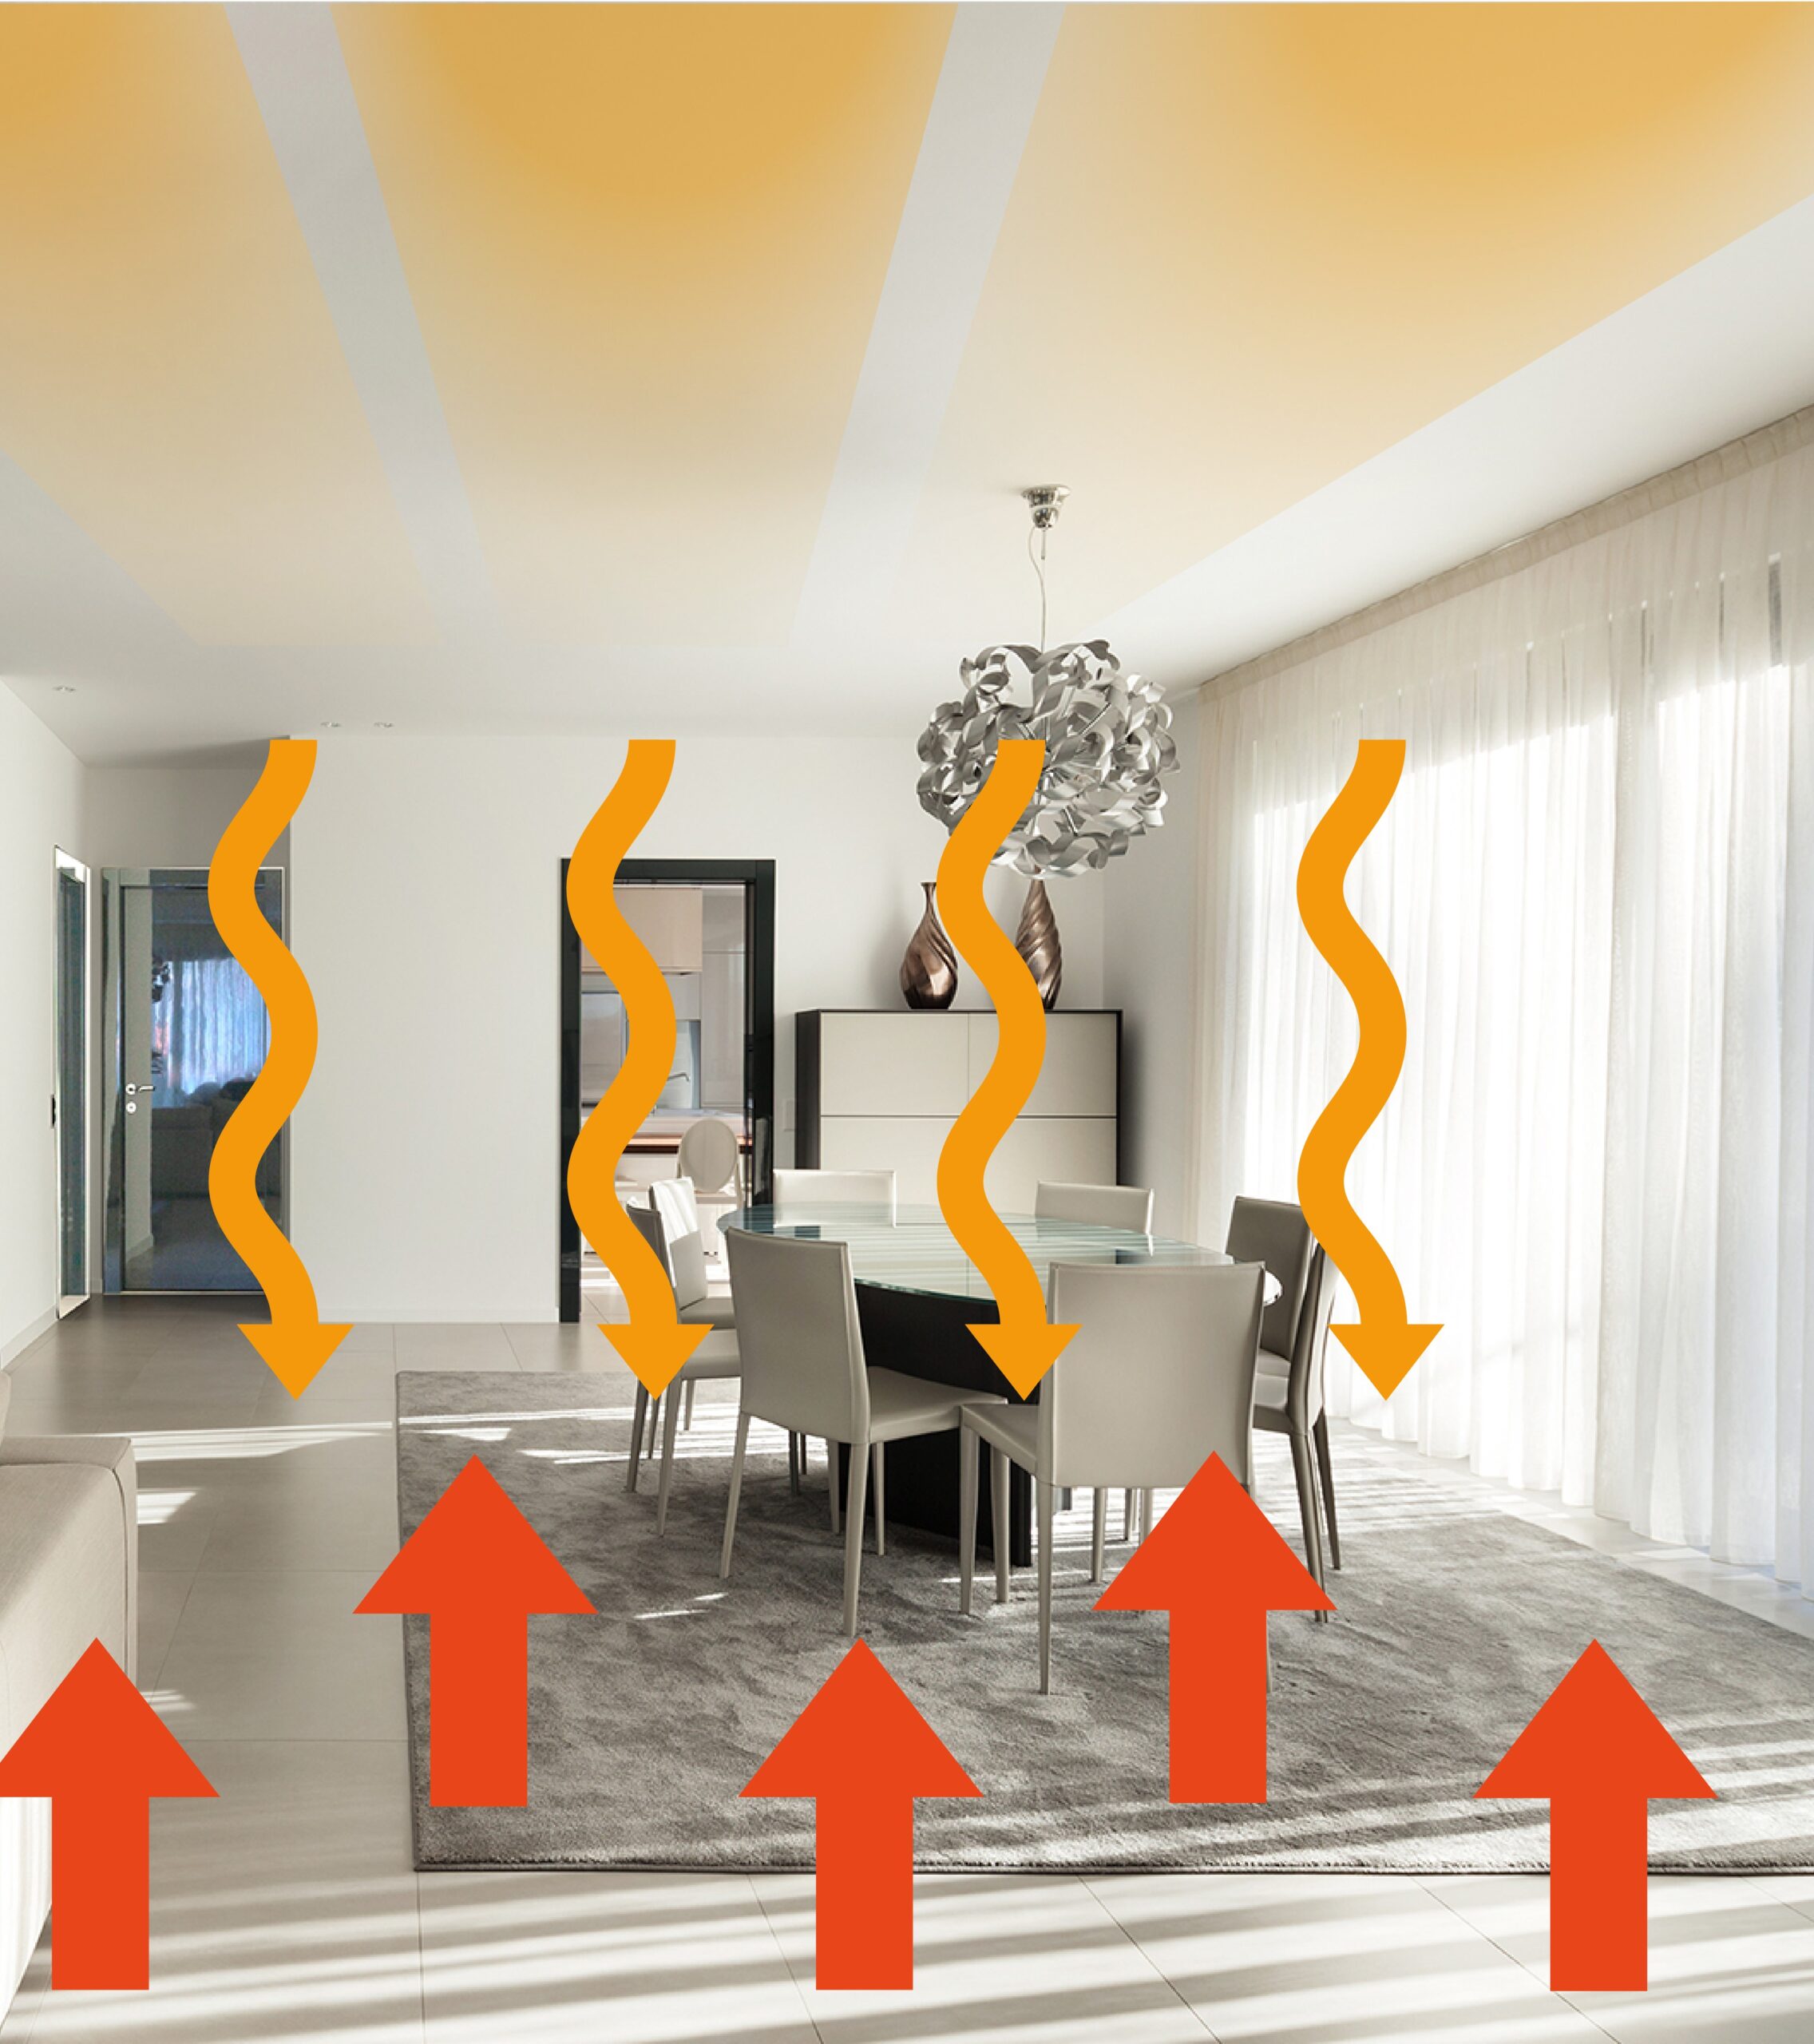 infrared heating from the ceiling